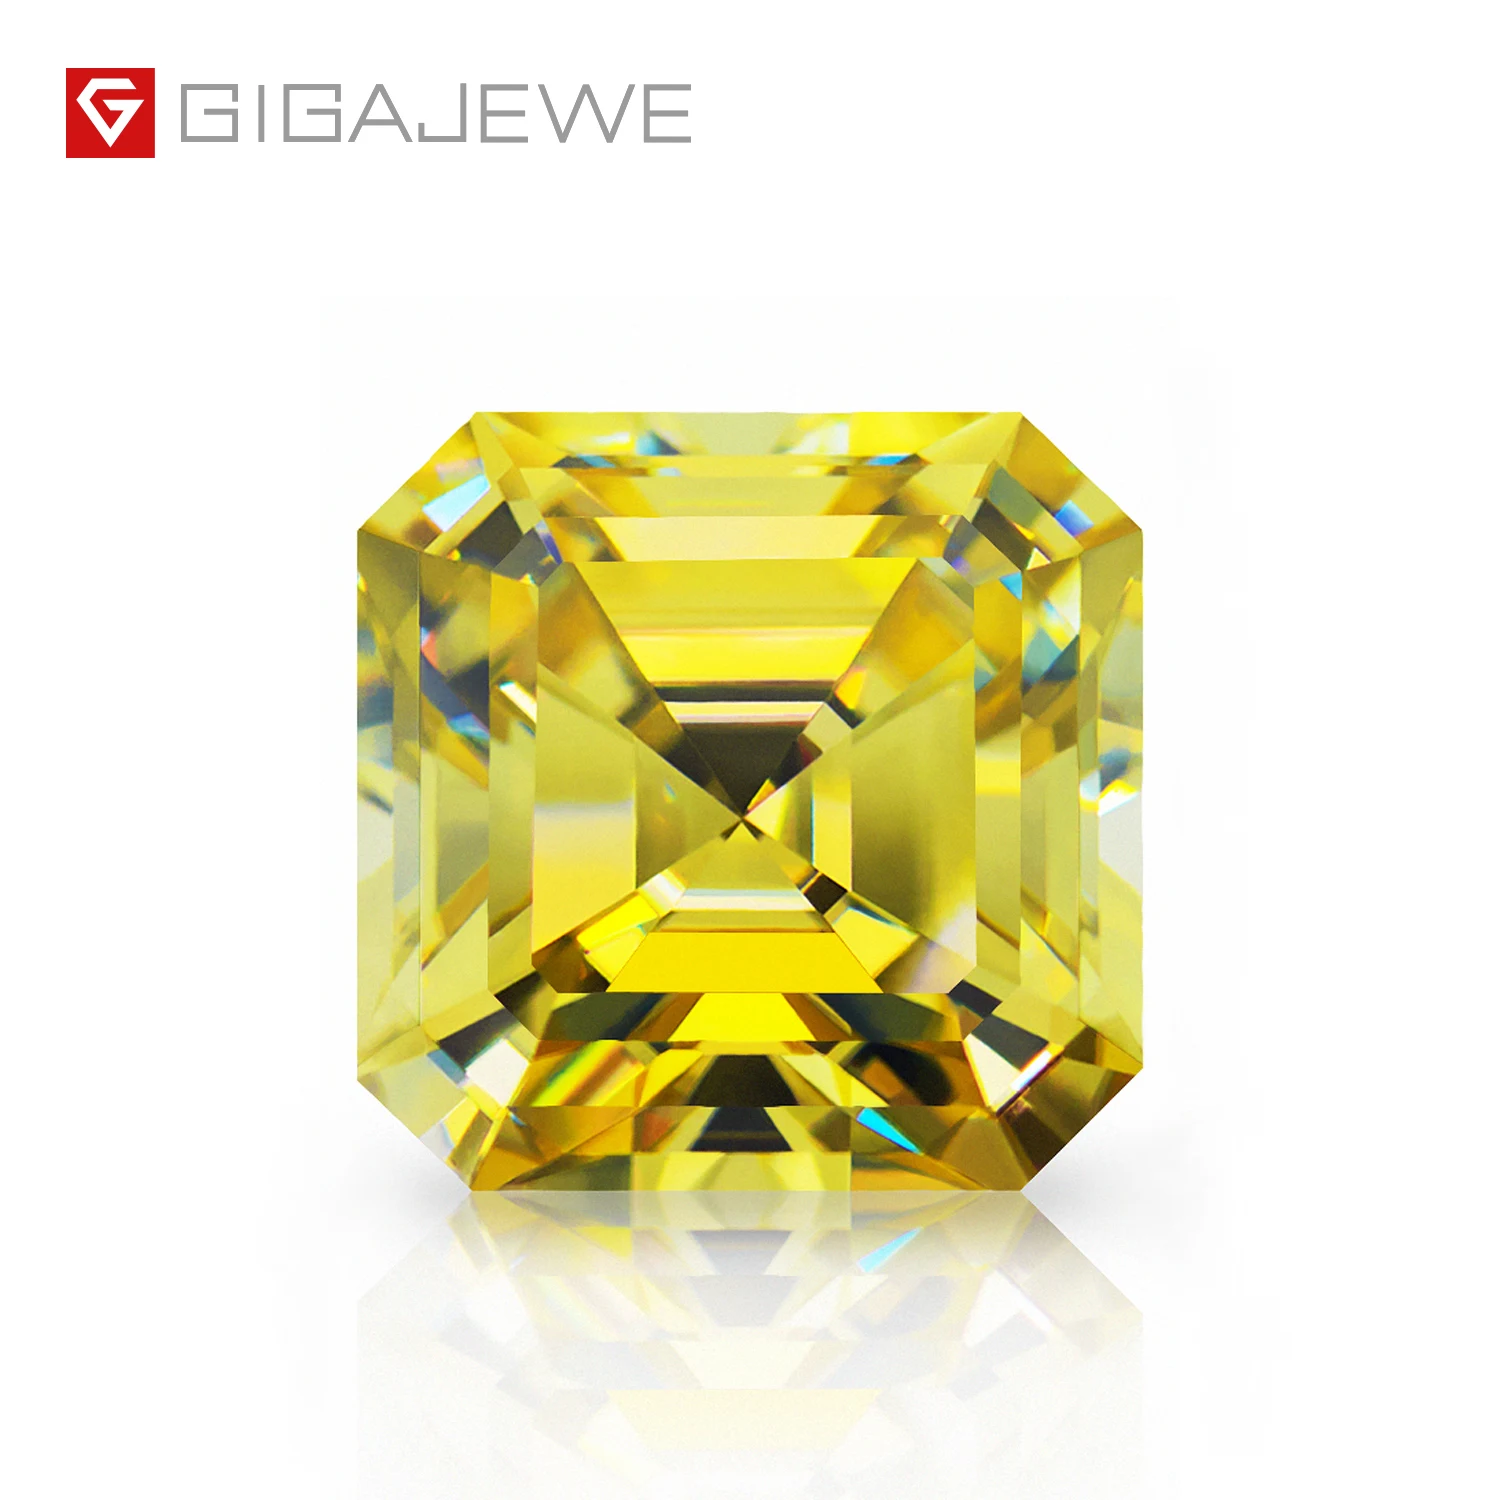 

GIGAJEWE Fancy Synthetic Lab Grown Moissanite diamond Vivid Yellow color Asscher Cut Loose Gemstone for Jewelry making